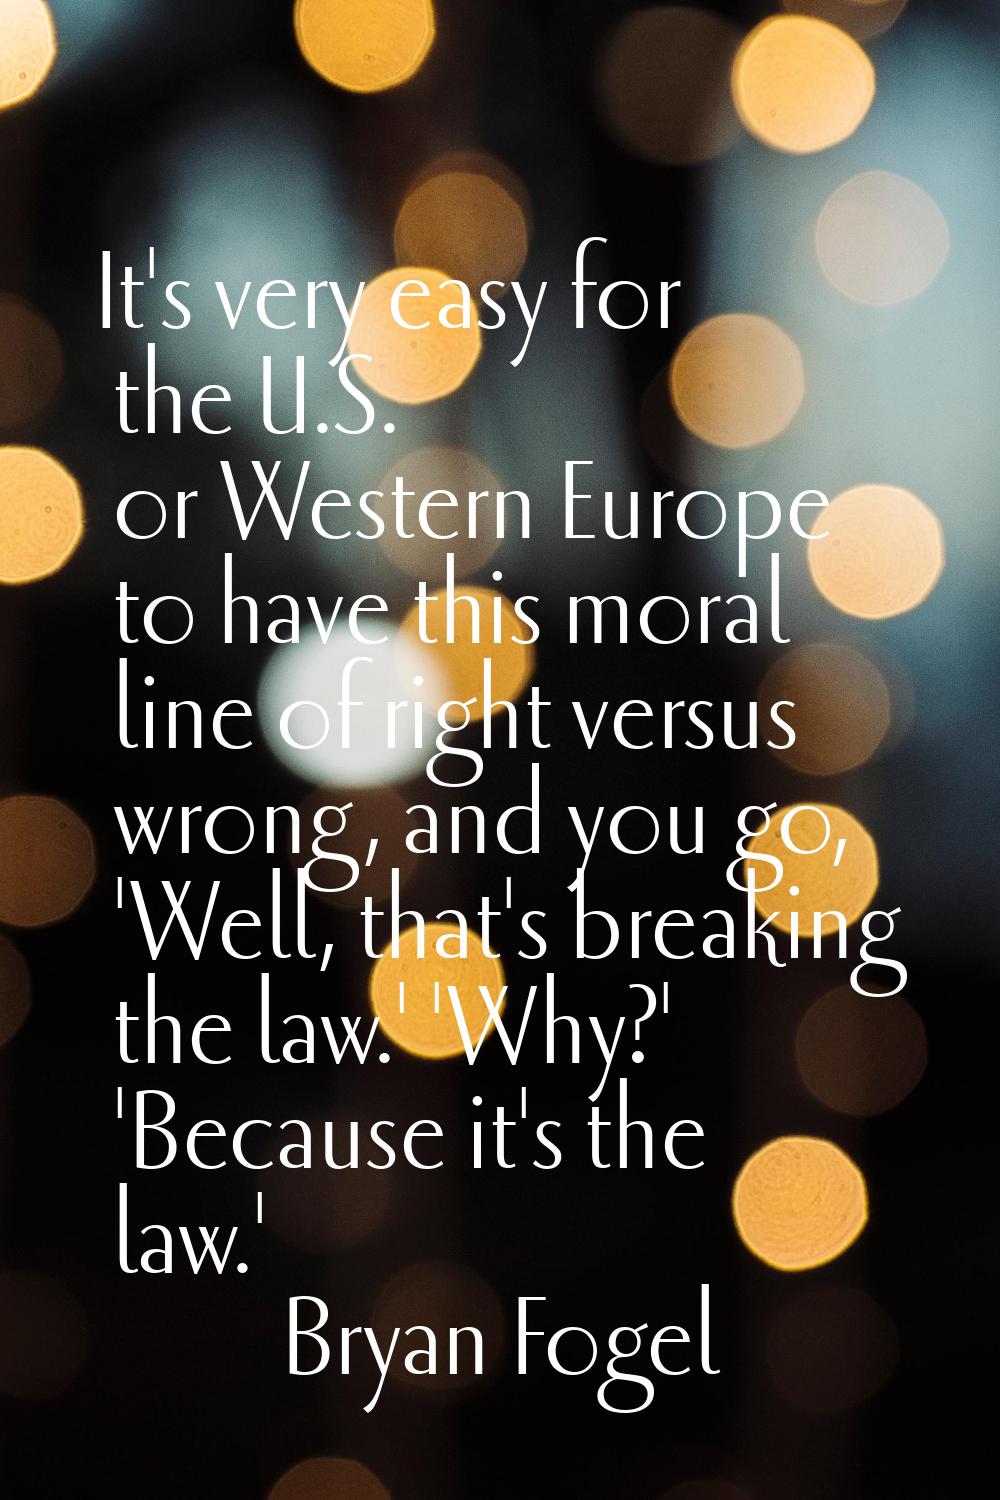 It's very easy for the U.S. or Western Europe to have this moral line of right versus wrong, and yo